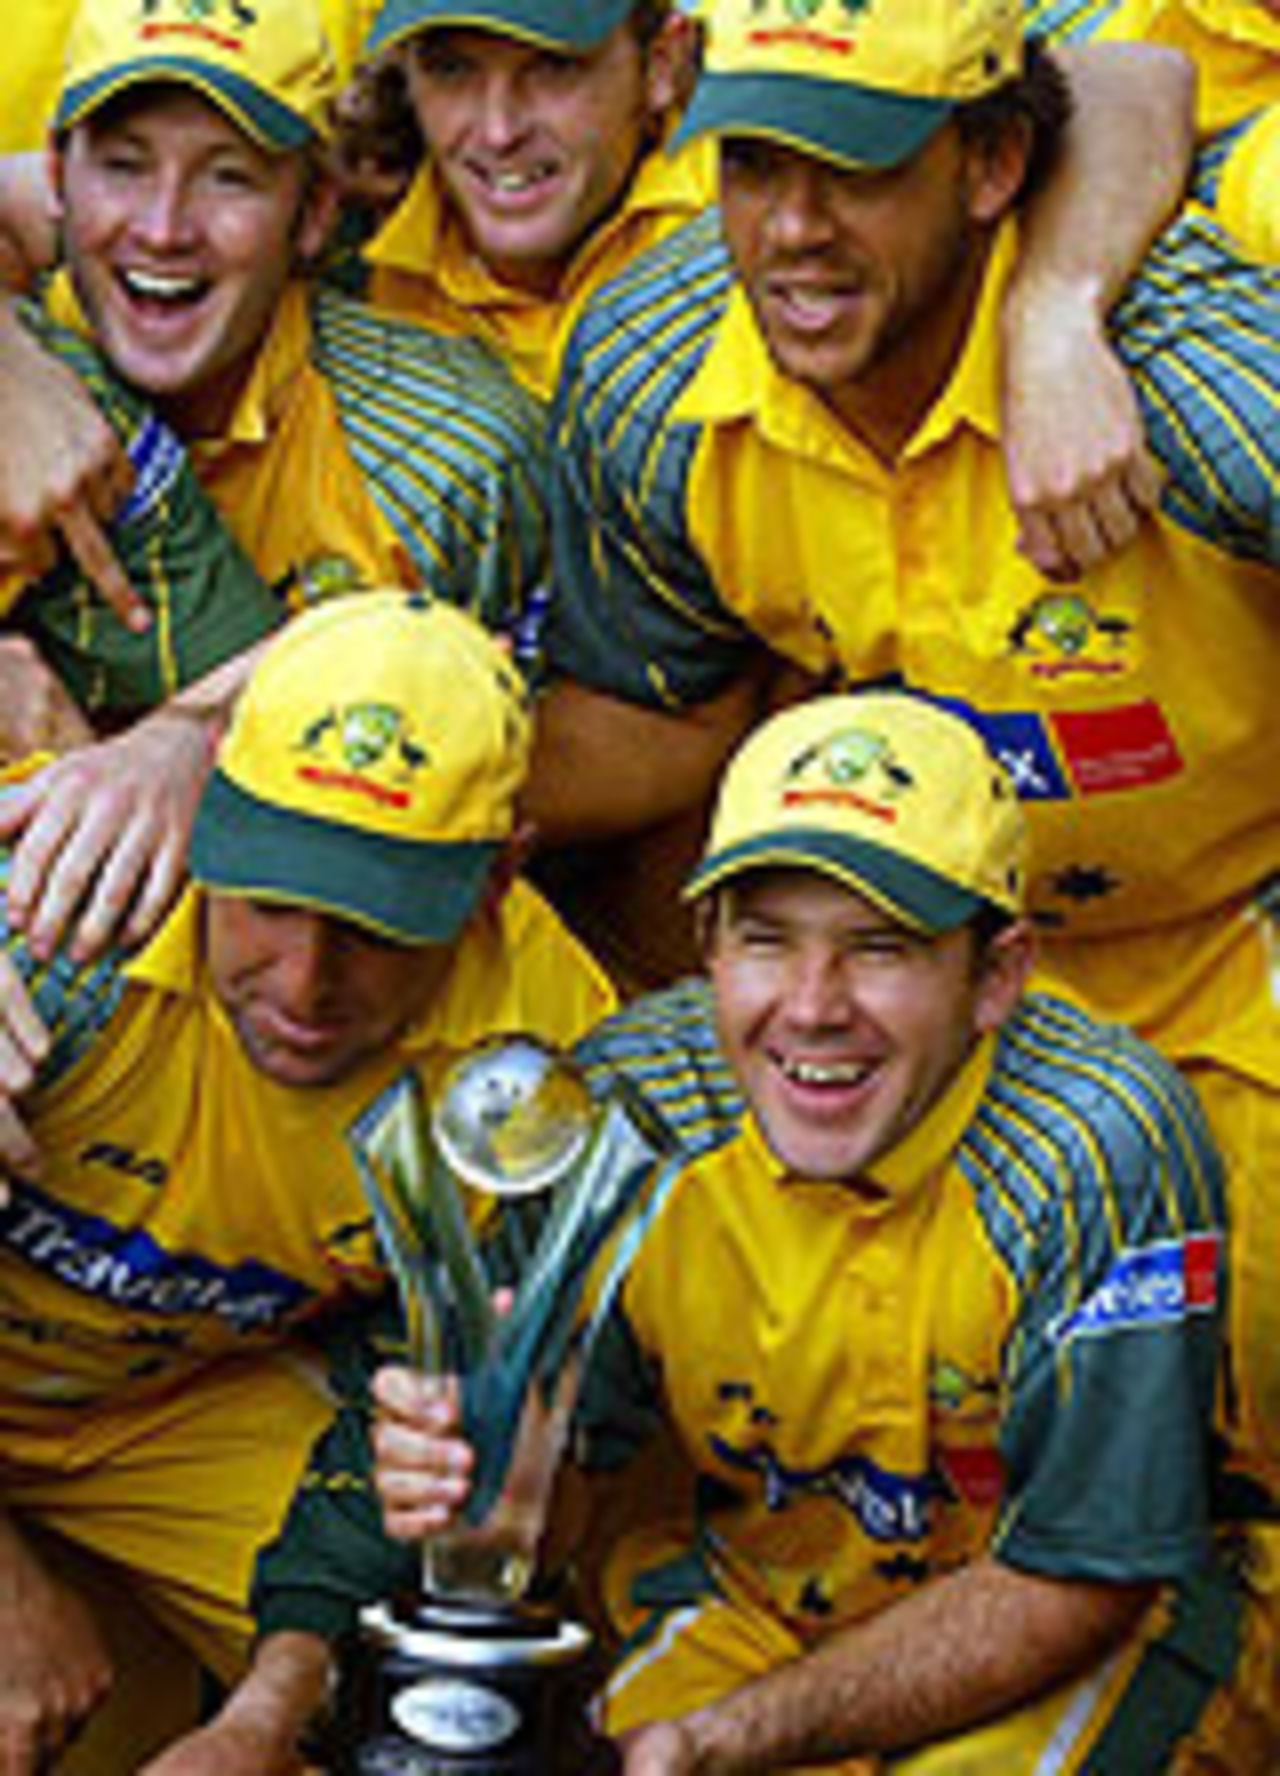 The Australian team with the Videocon Cup, Australia v Pakistan, Videocon Cup, Final, August 28, 2004